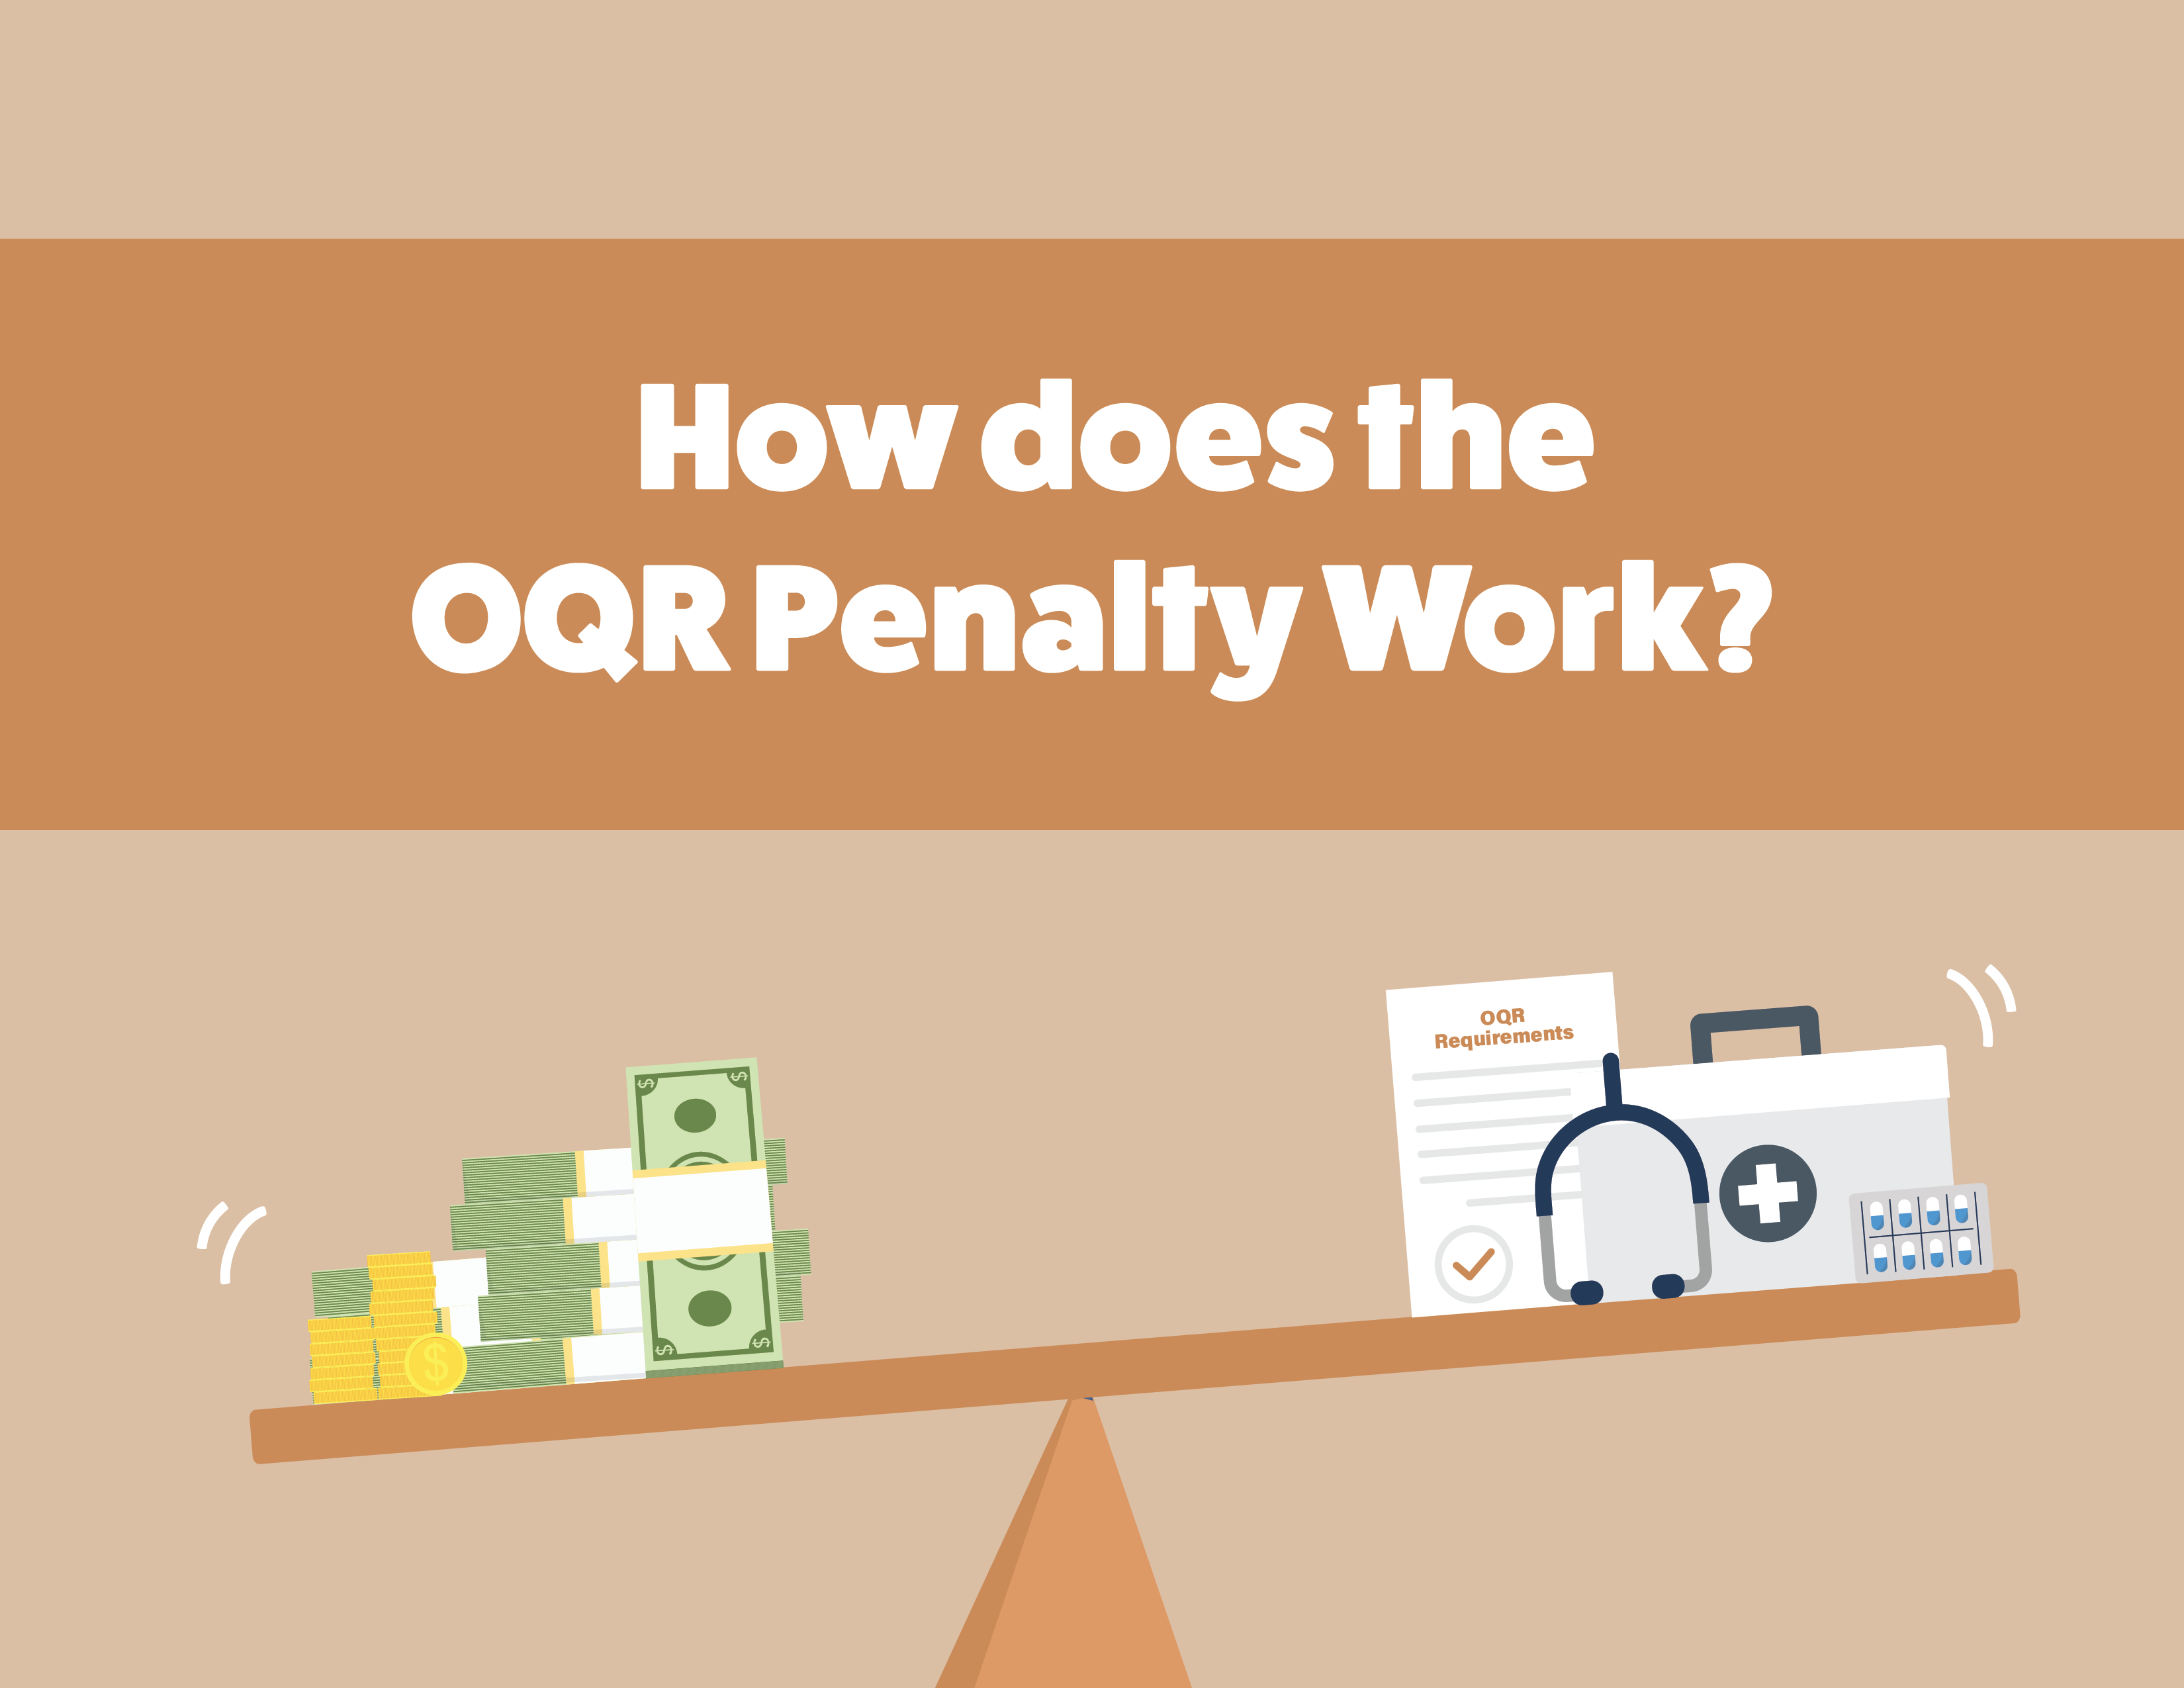 How Does the OQR Penalty Work?